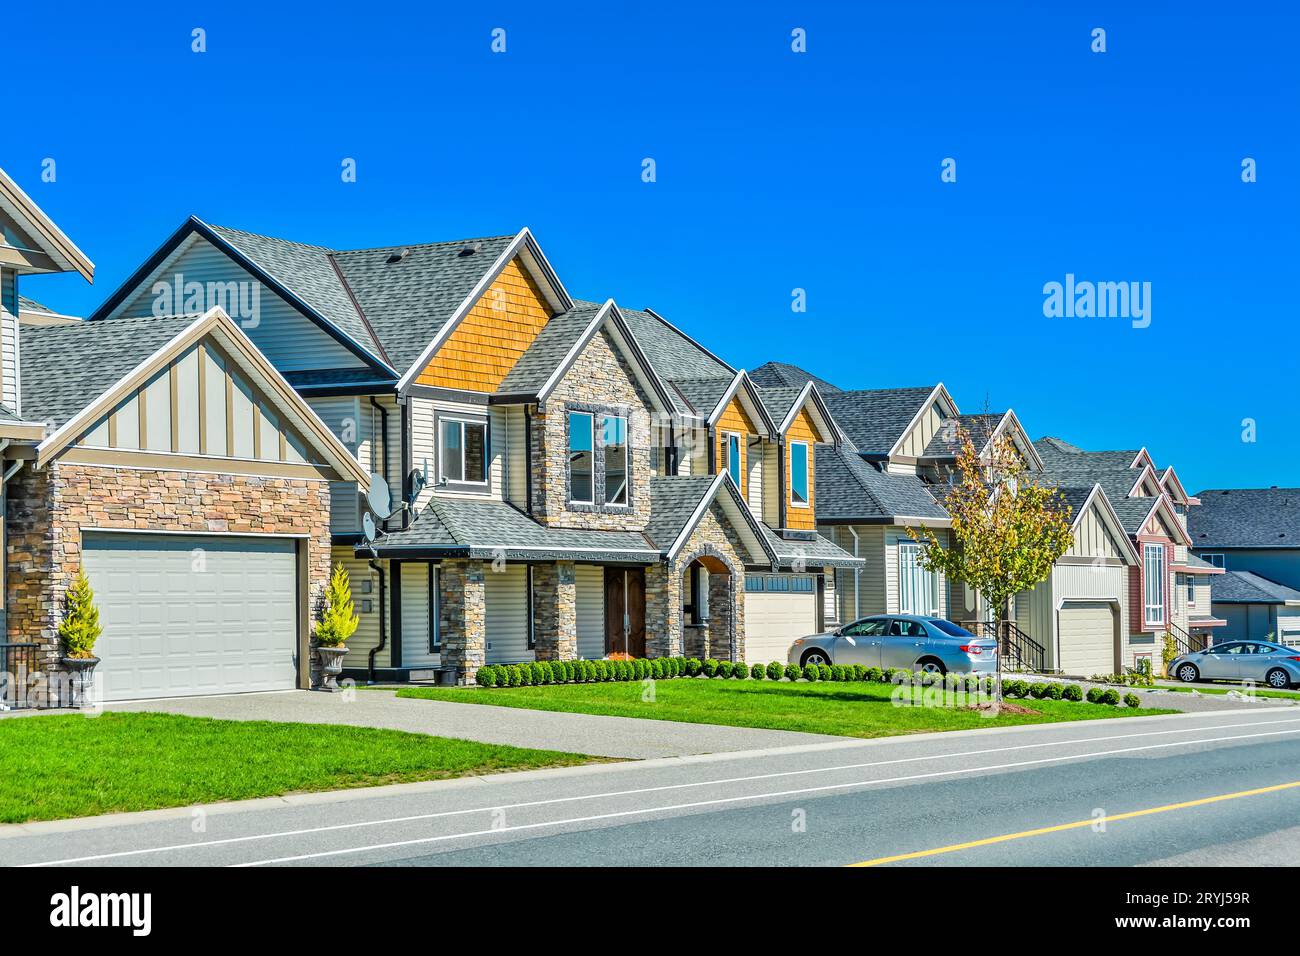 A perfect neighborhood of family houses in suburban area of Vancouver Stock Photo